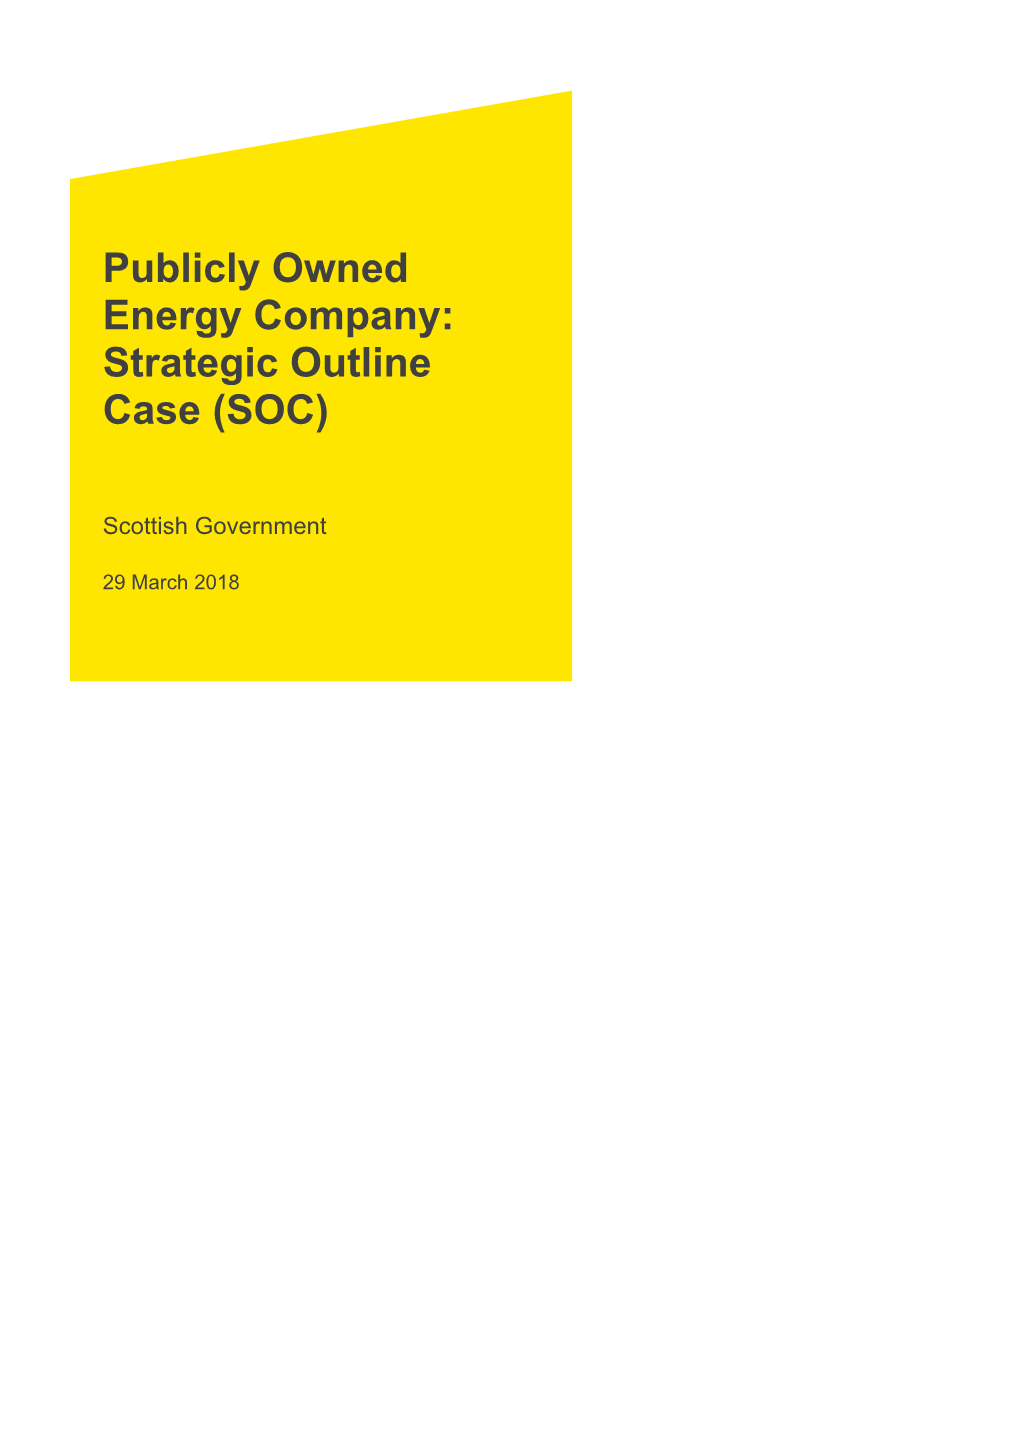 Publicly Owned Energy Company: Strategic Outline Case (SOC)